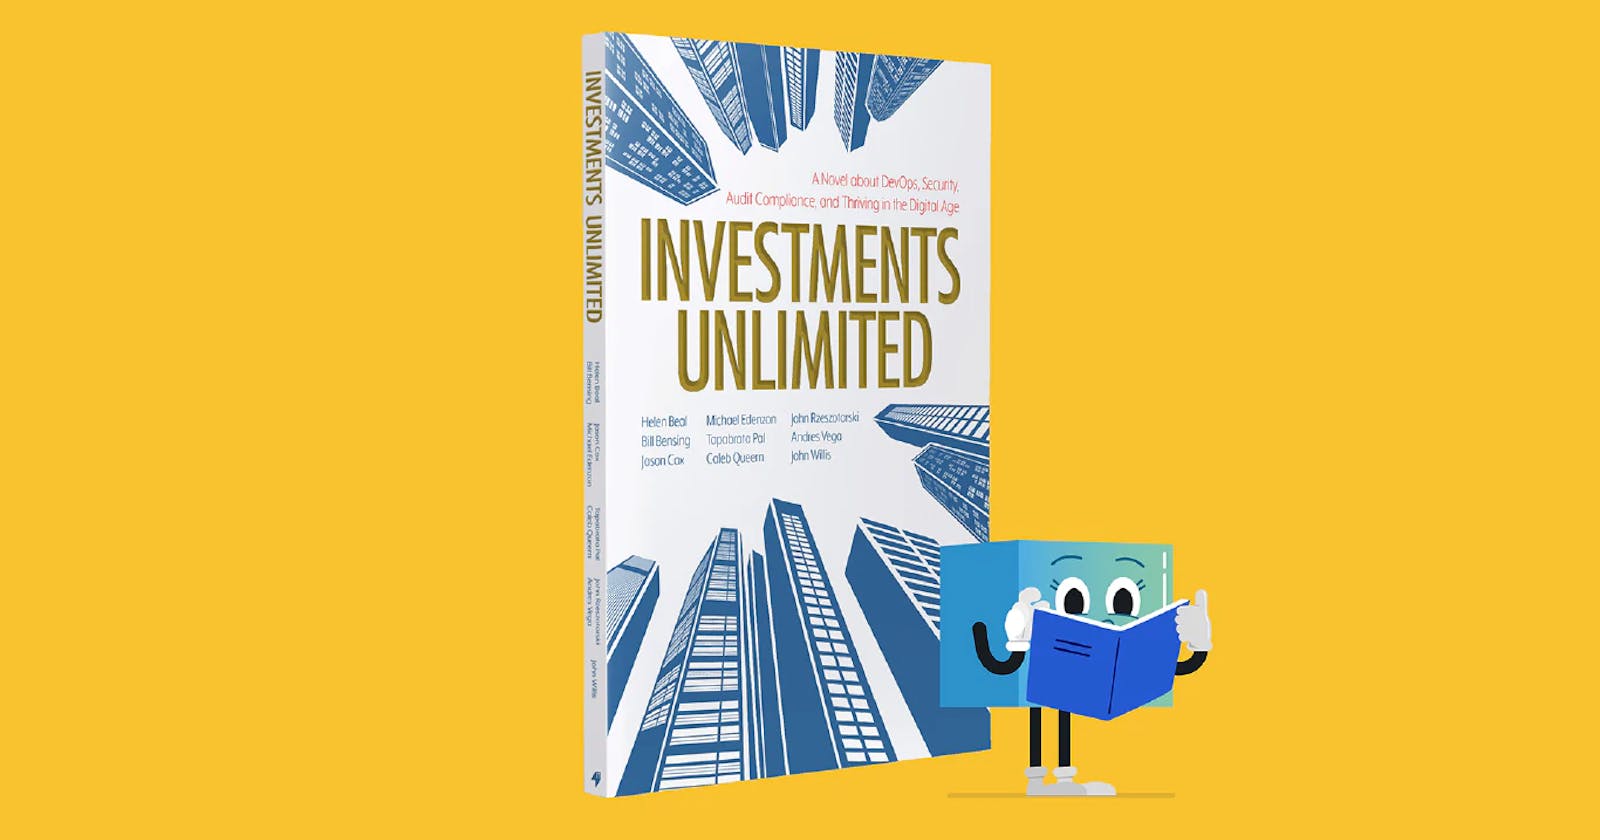 Review: Investments Unlimited - A Novel about DevOps, Security, Audit Compliance, and Thriving in the Digital Age